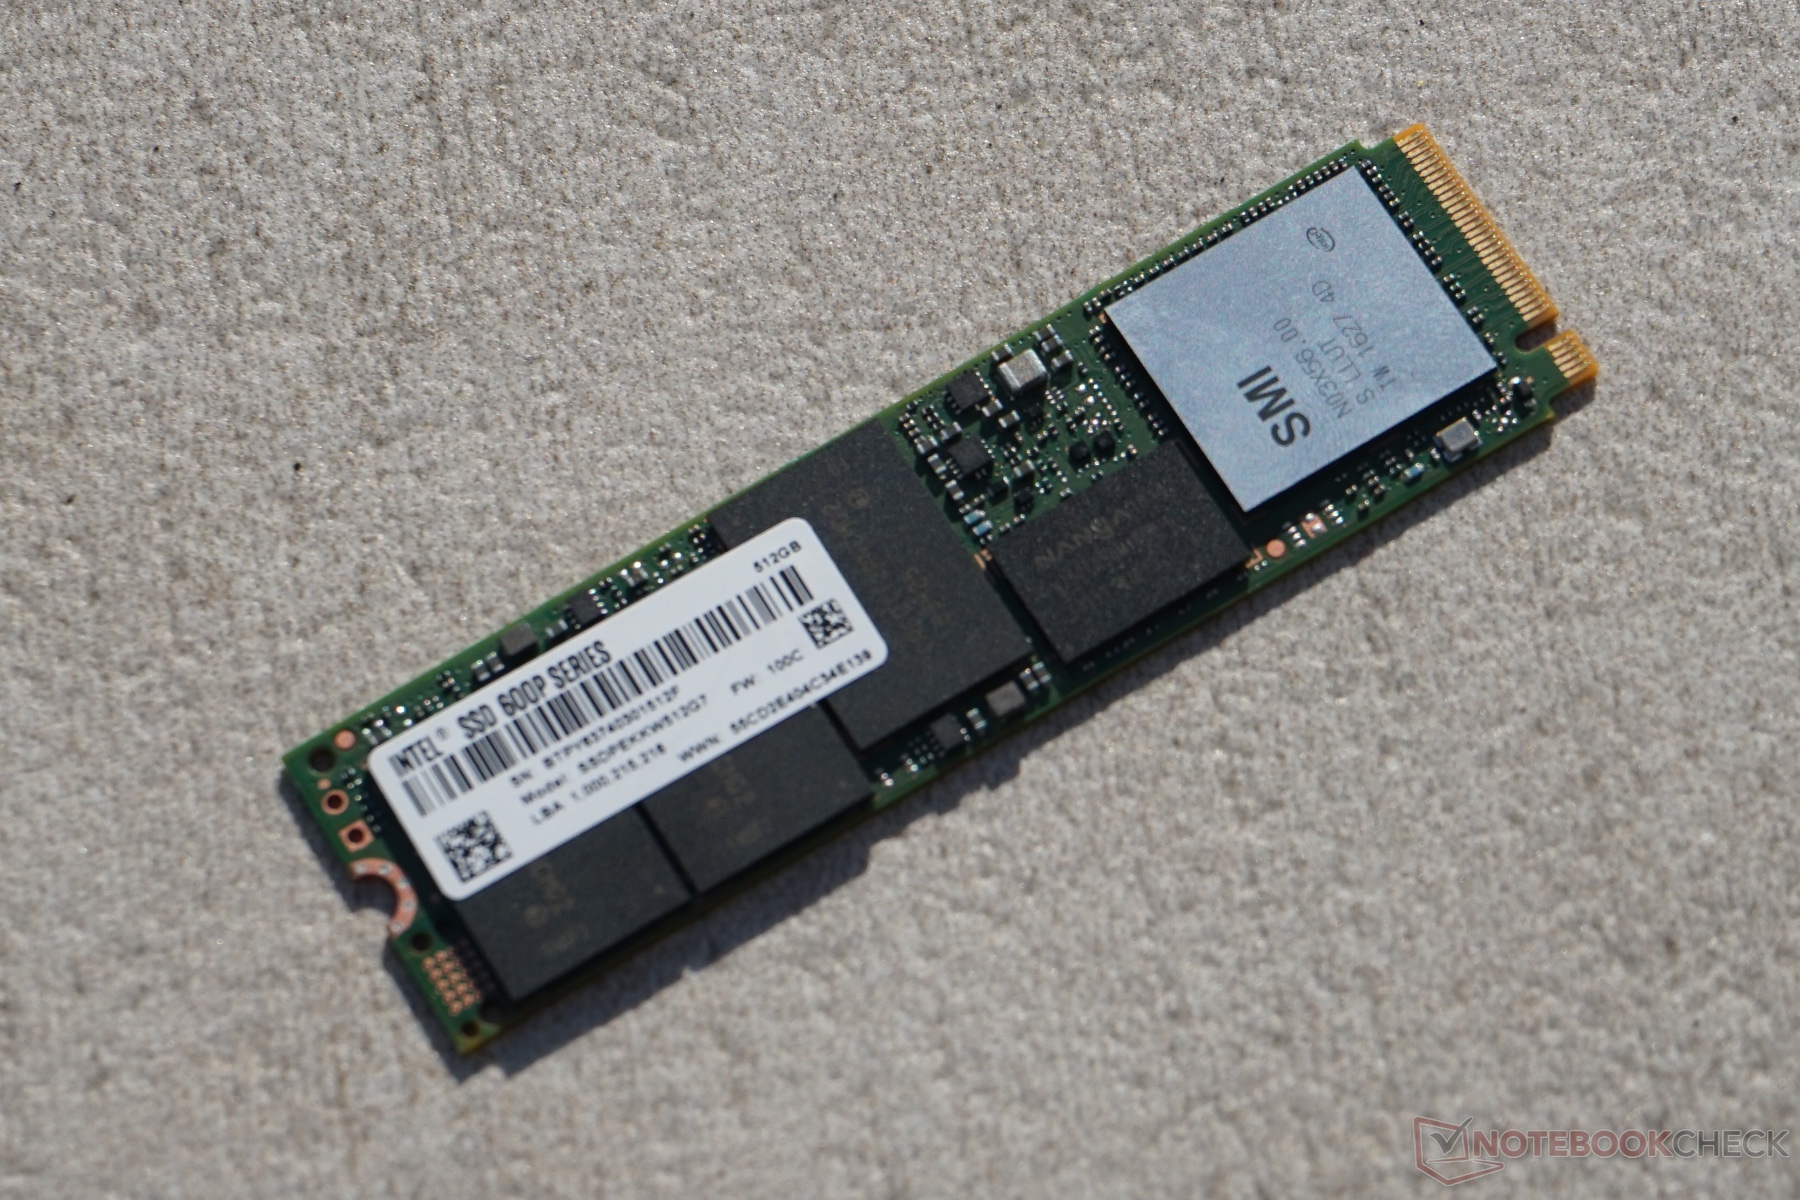 Intel SSD 600p GB Review: The Entry-Level NVMe SSD - NotebookCheck.net Reviews